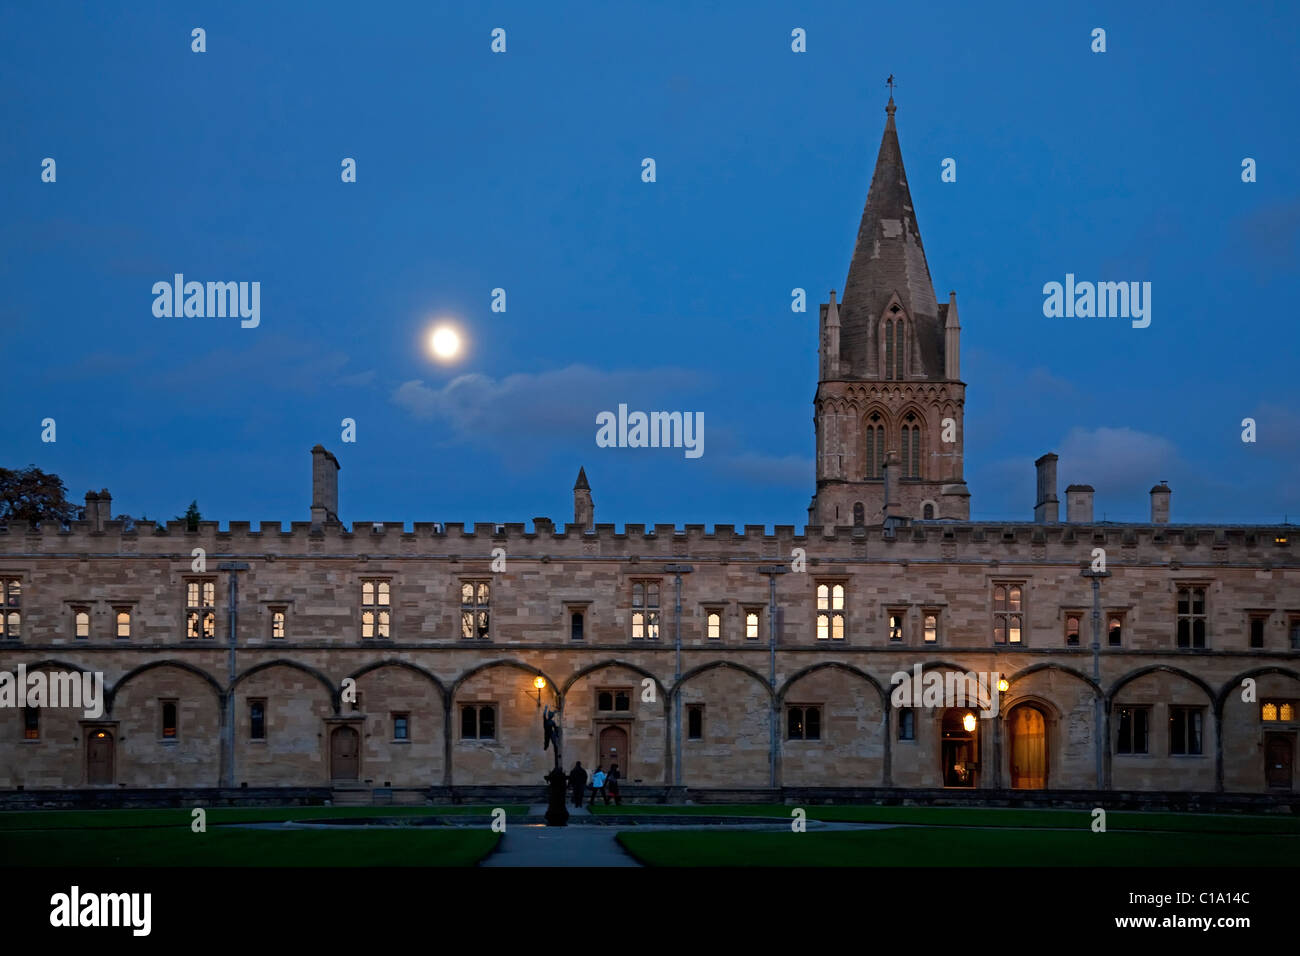 Christ Church College of the Oxford University, Oxfordshire, England, UK Stock Photo